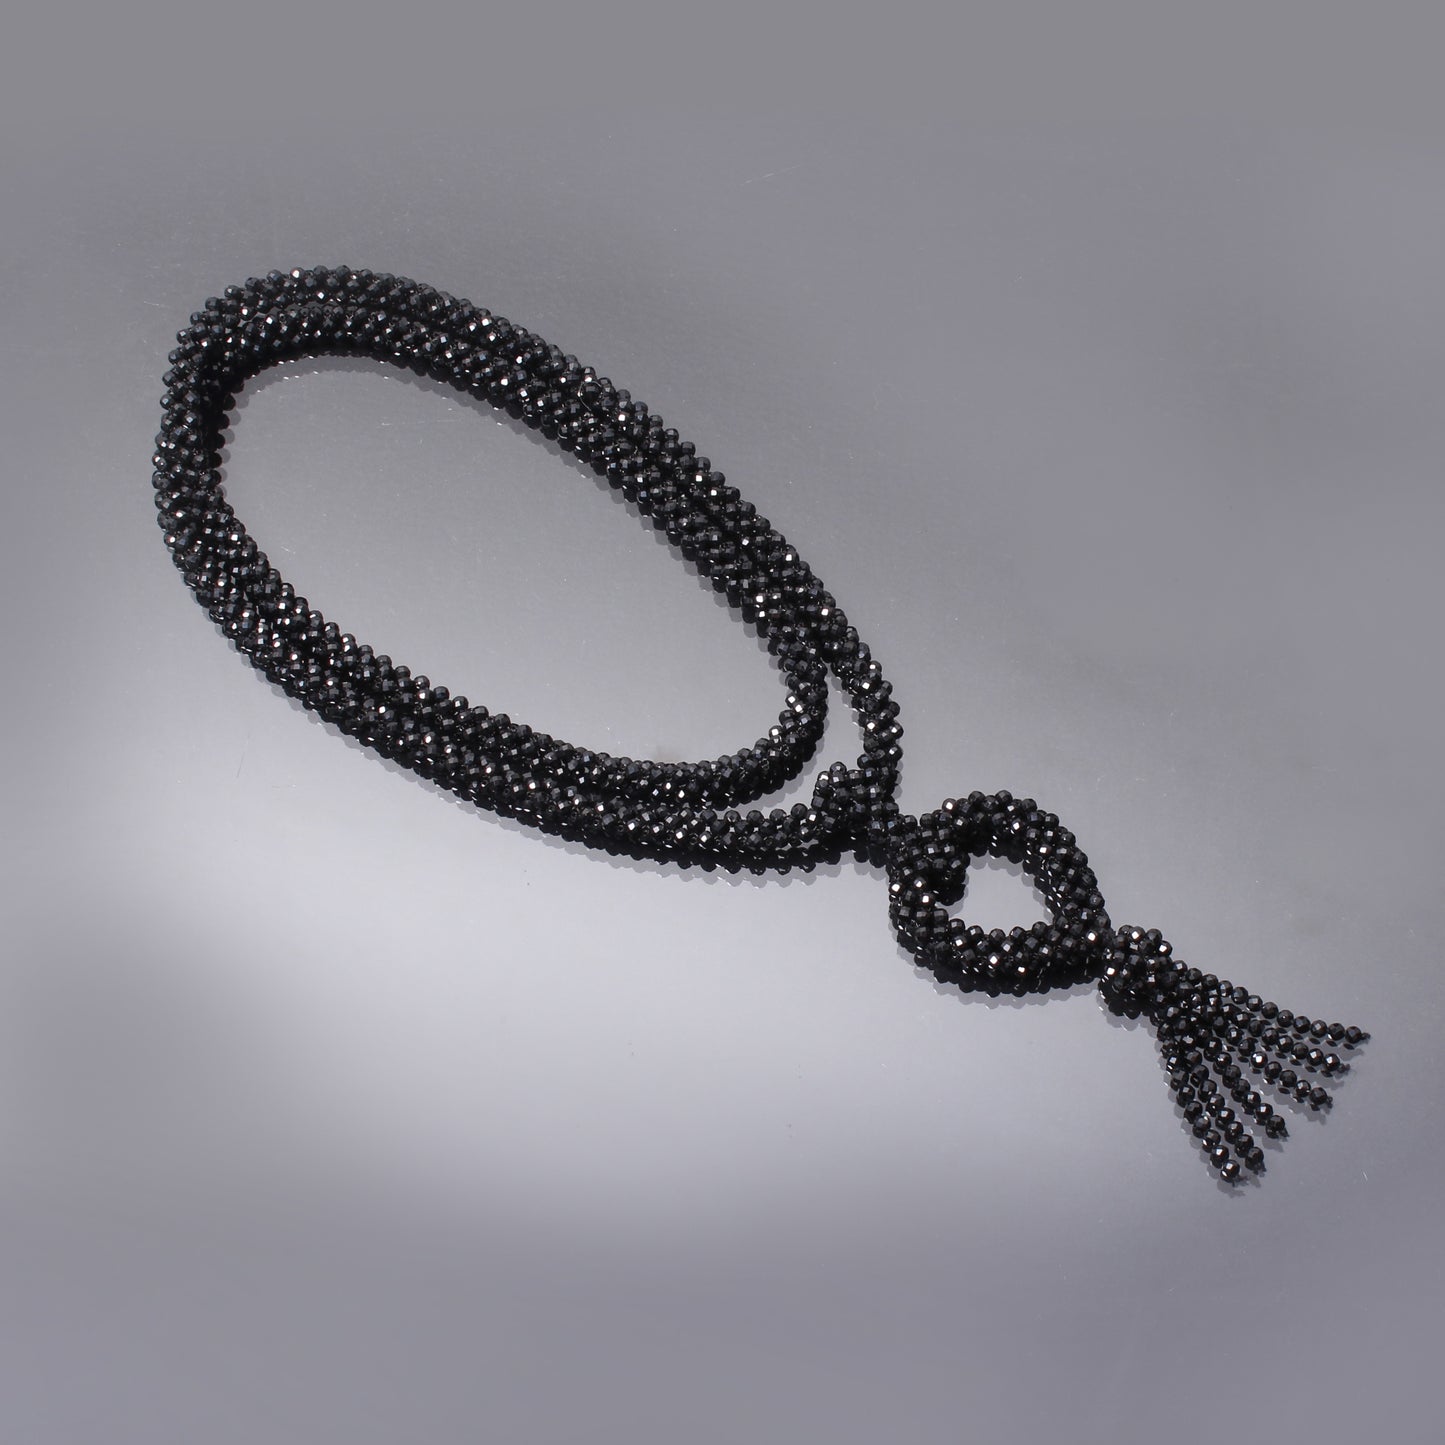 Natural Black Spinel Beaded Mala Necklace with Long Beaded Pendant